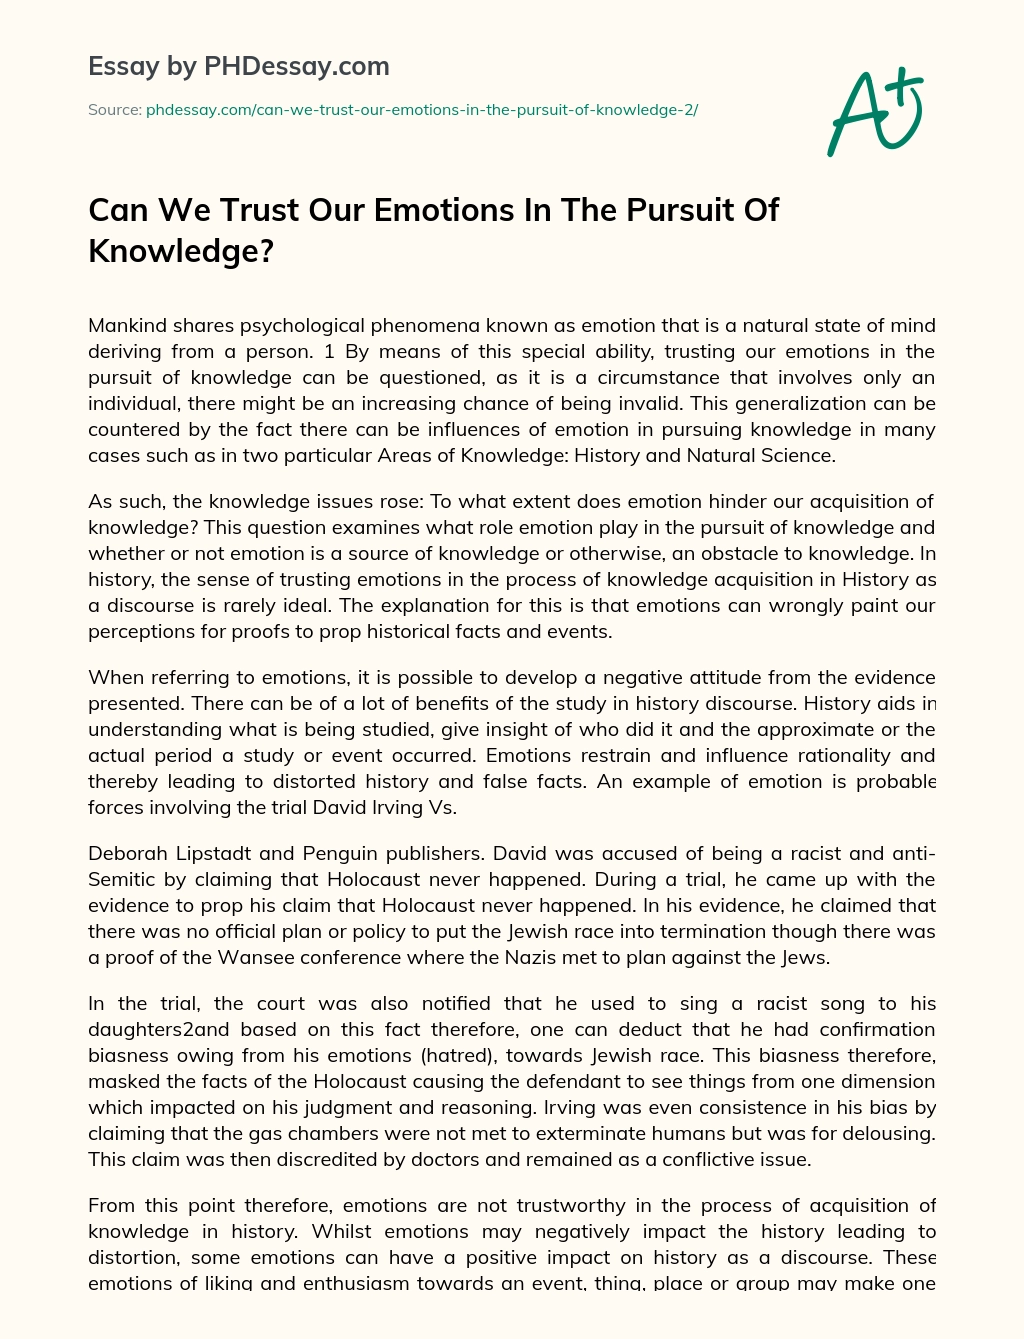 Can We Trust Our Emotions In The Pursuit Of Knowledge? essay